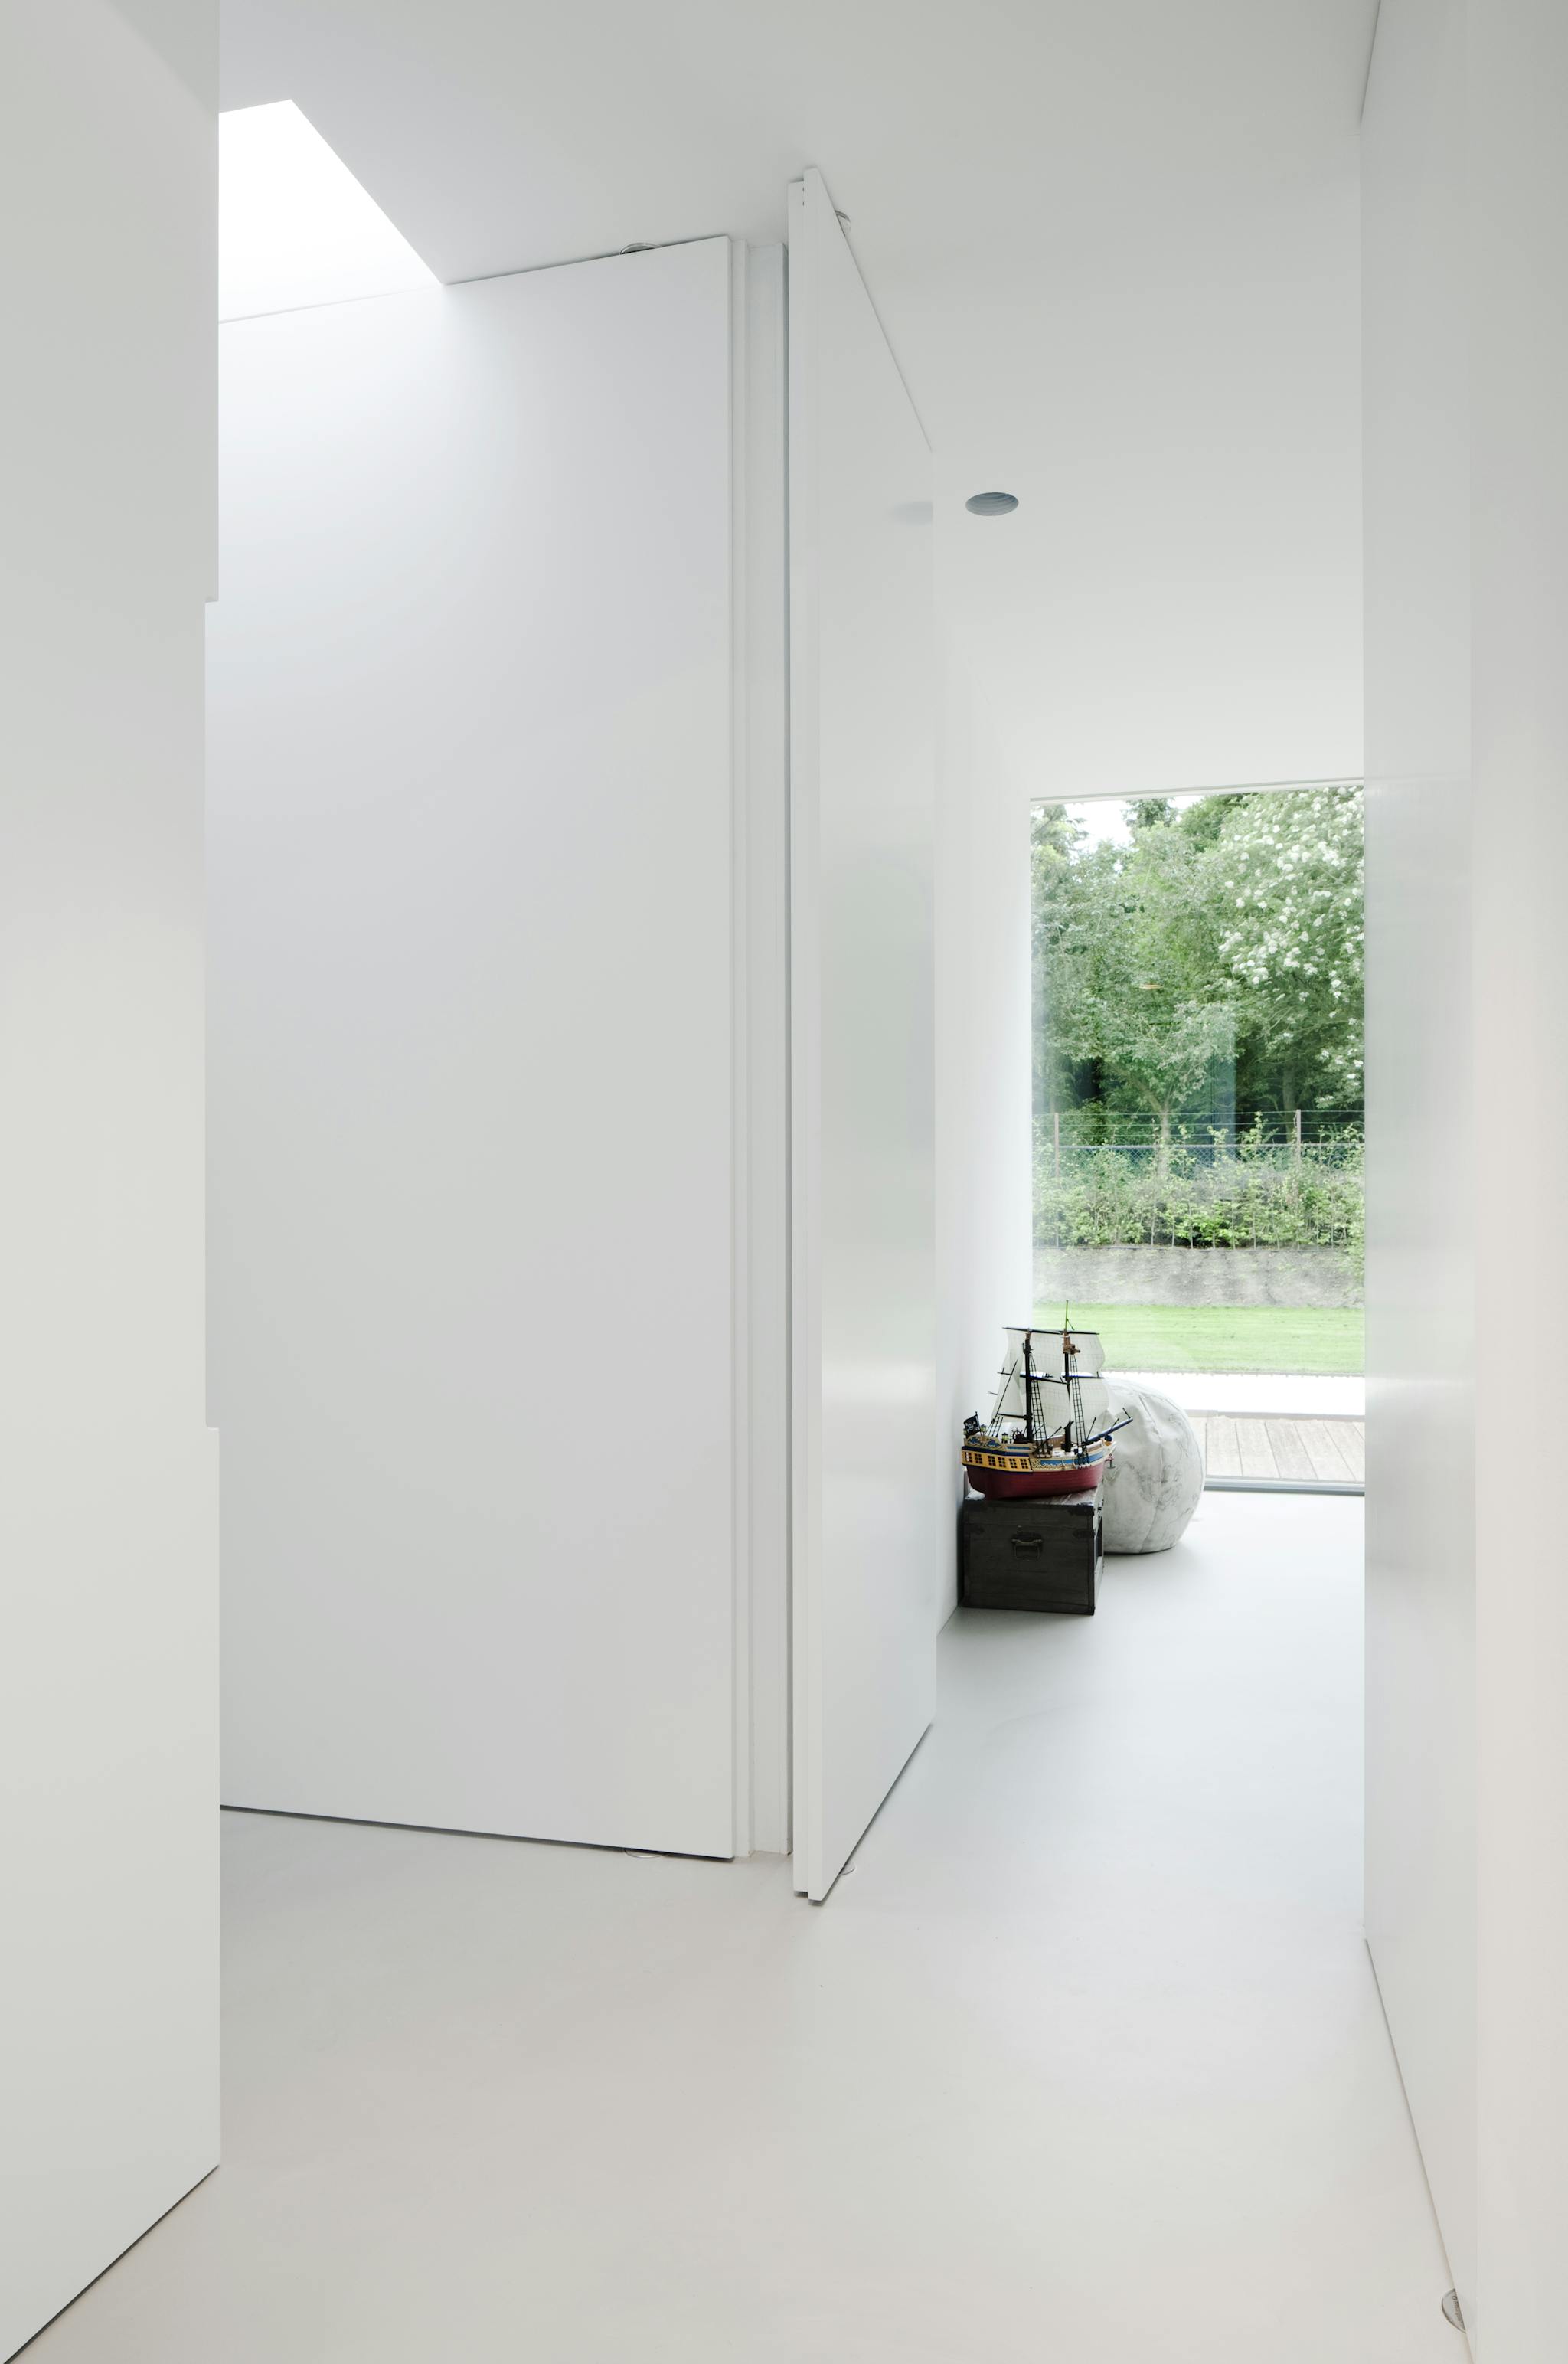 A white minimal interior with closed pivoting door and opening into a bedroom.